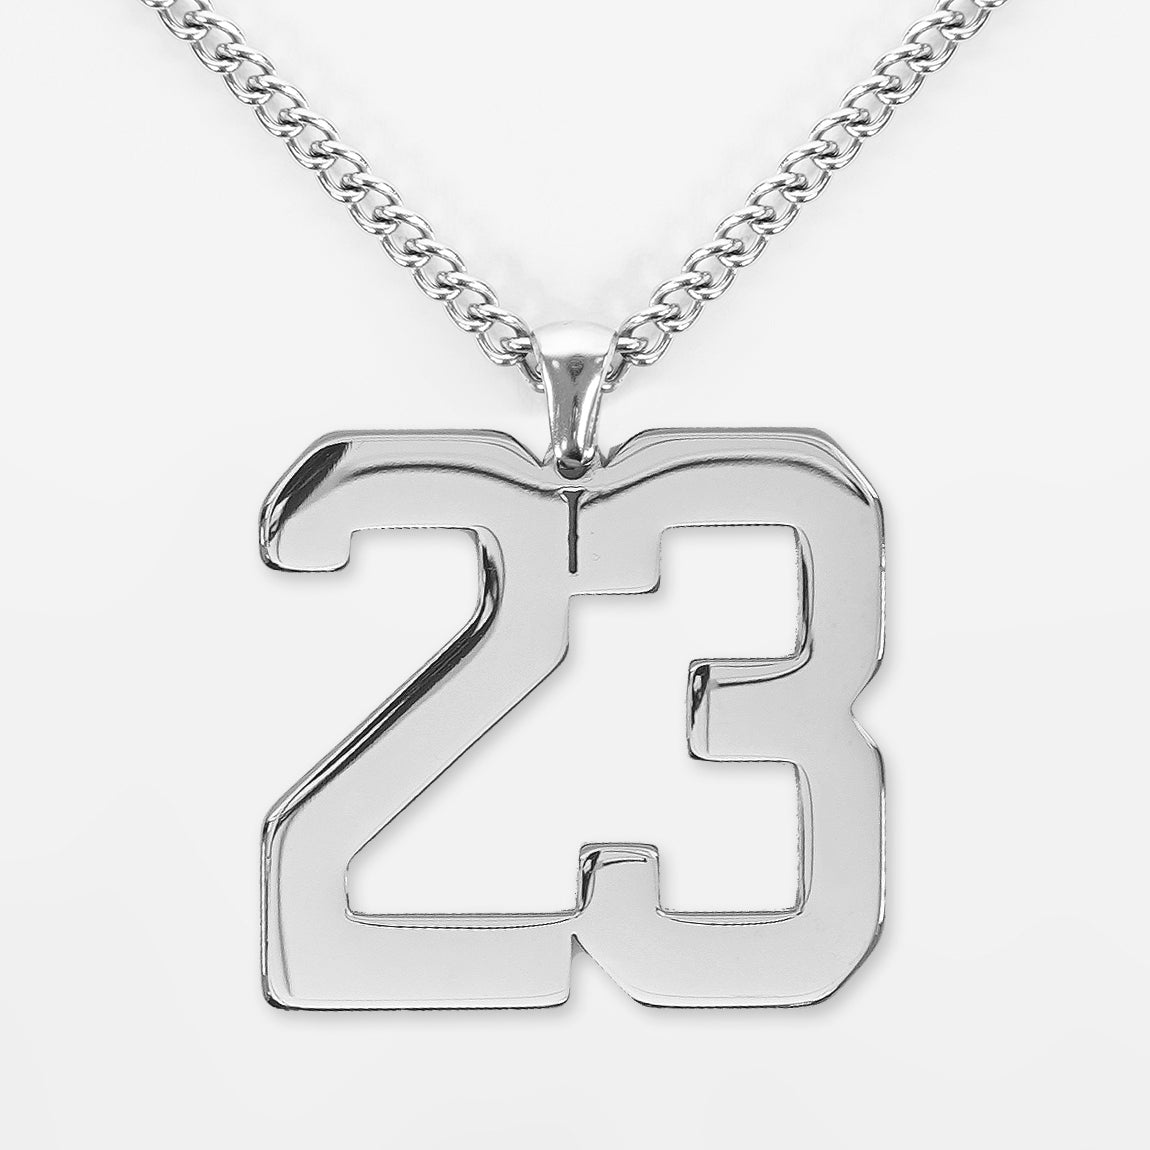 23 Number Pendant with Chain Necklace - Stainless Steel